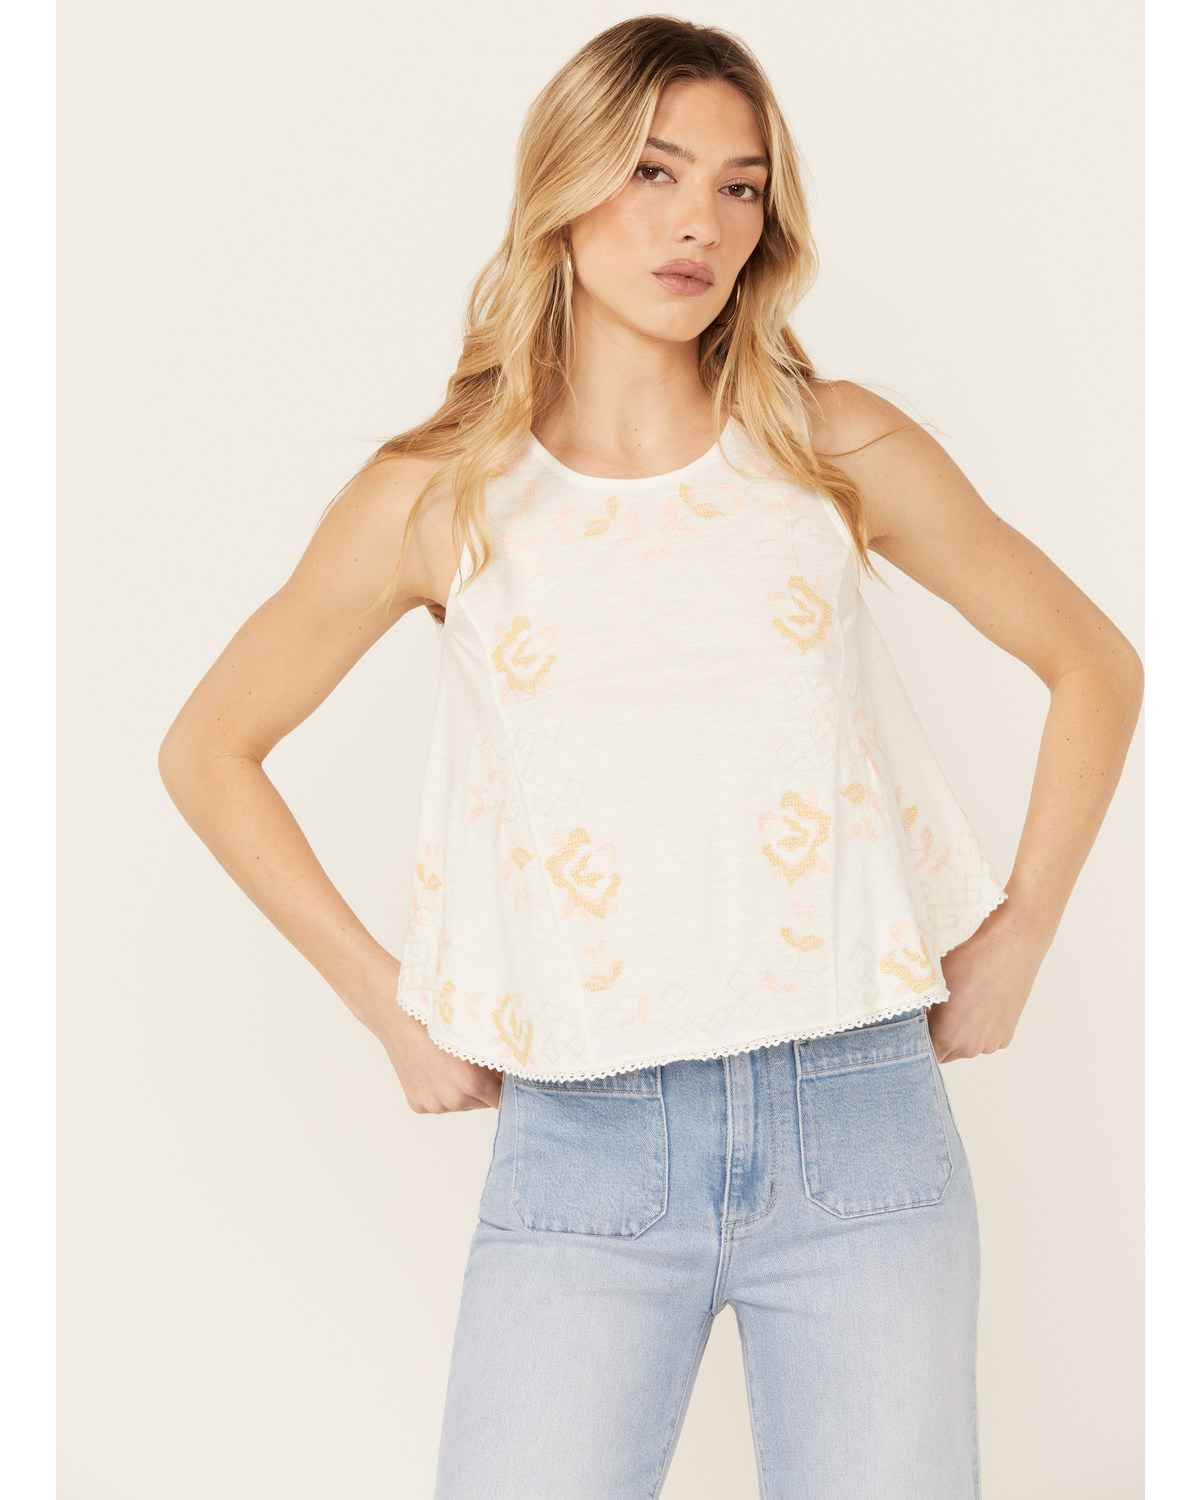 Free People Women's Fun and Flirty Embroidered Top